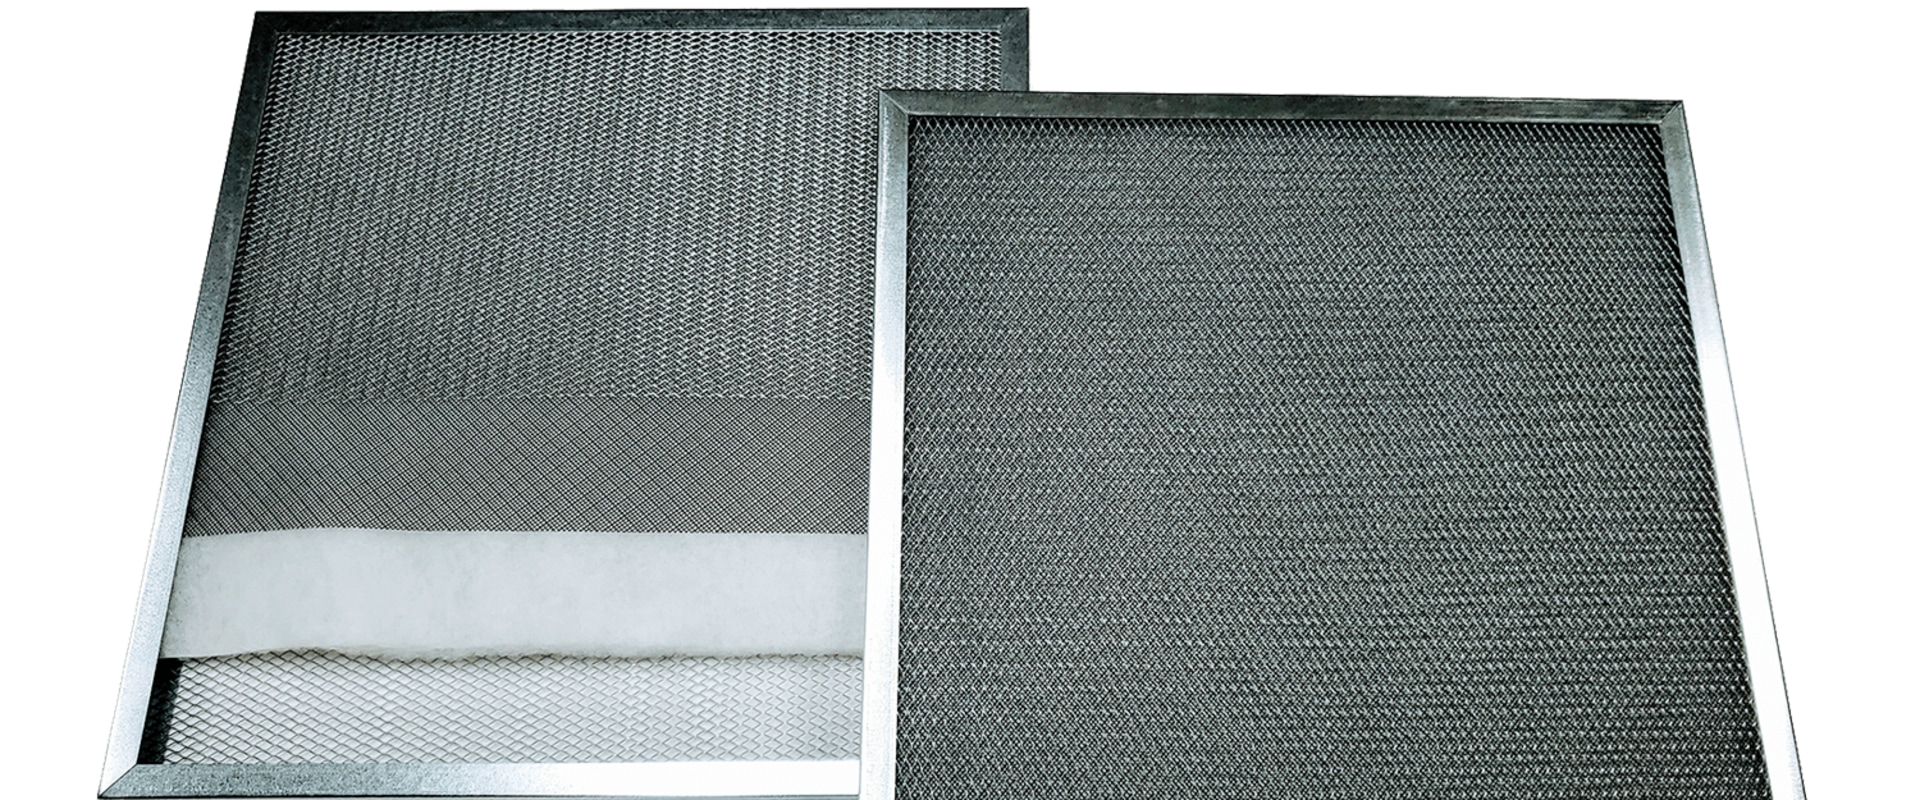 Are Washable Furnace Filters the Best Choice for Your Home?